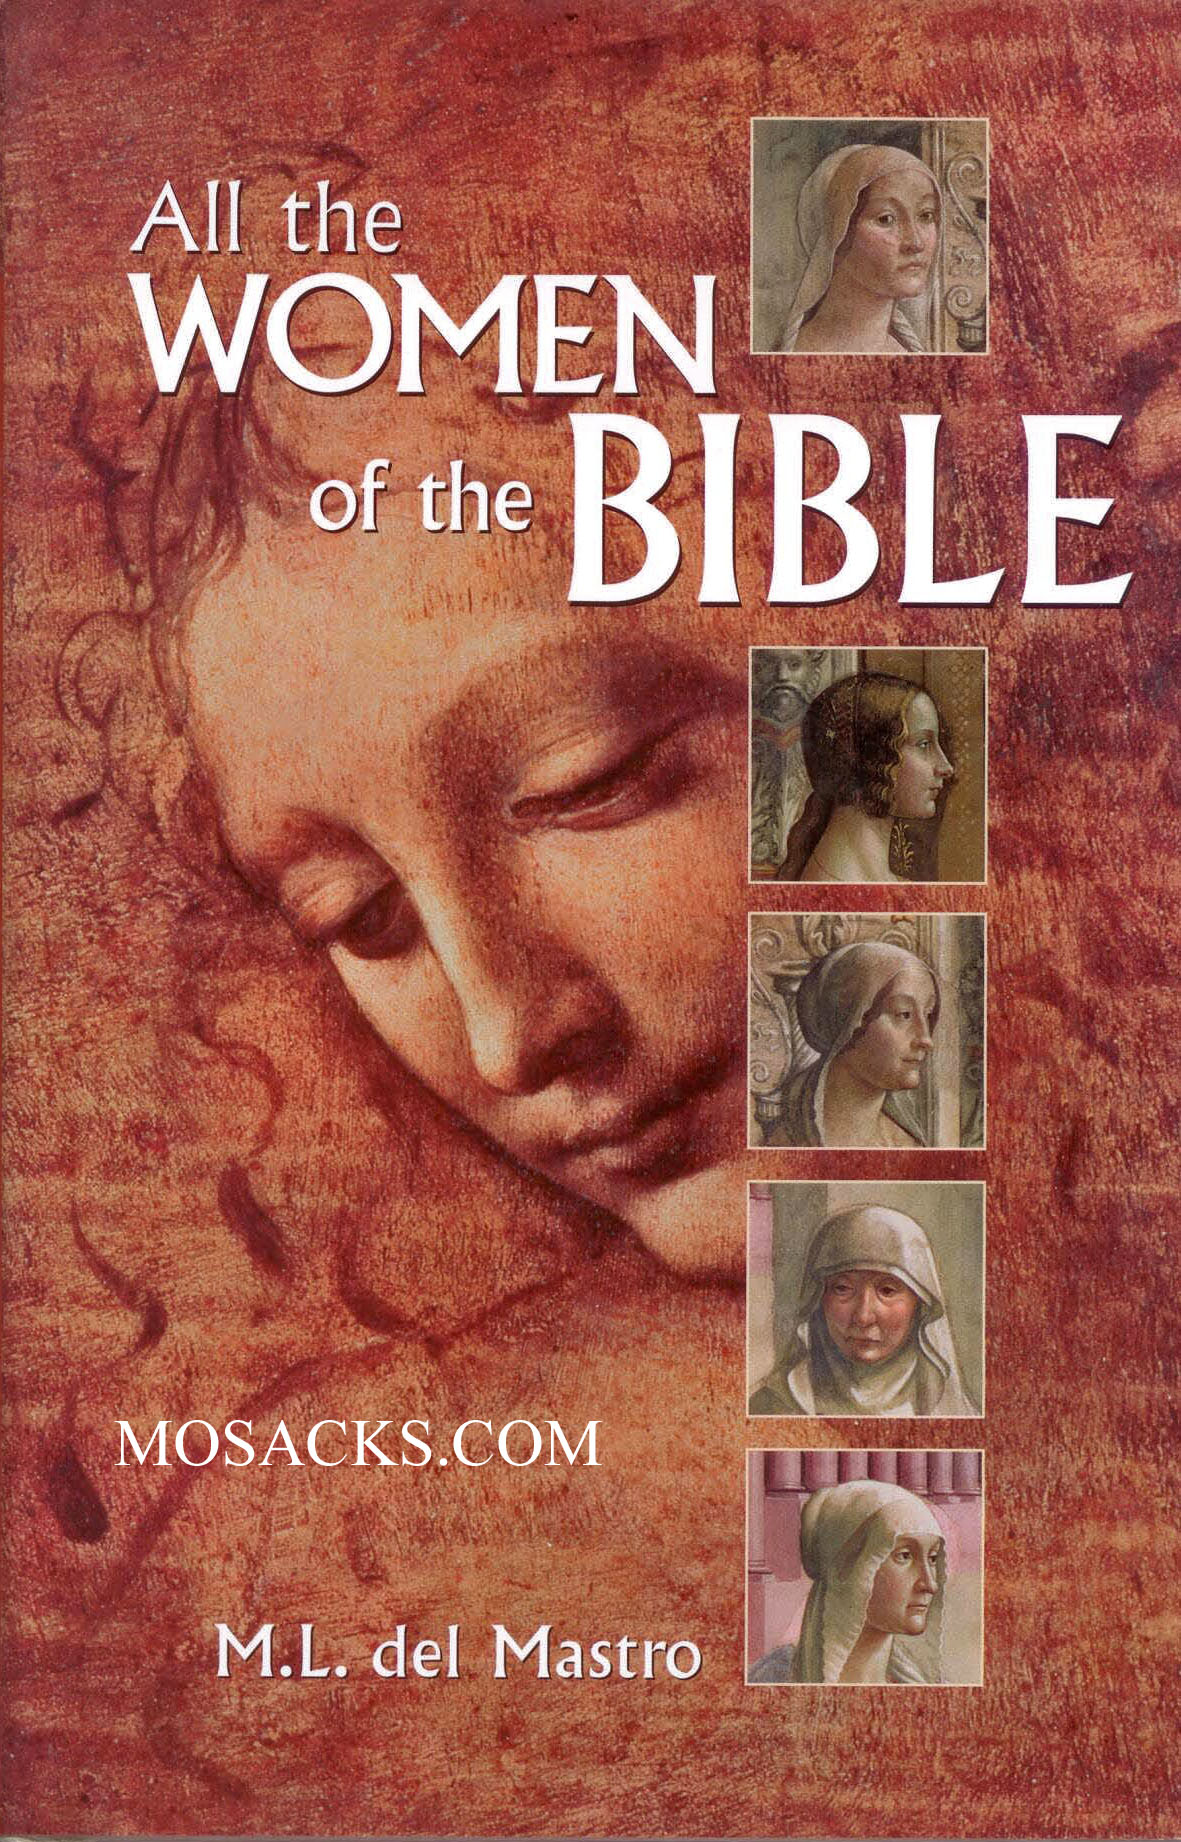 All The Women Of The Bible by M.L. del Mastro